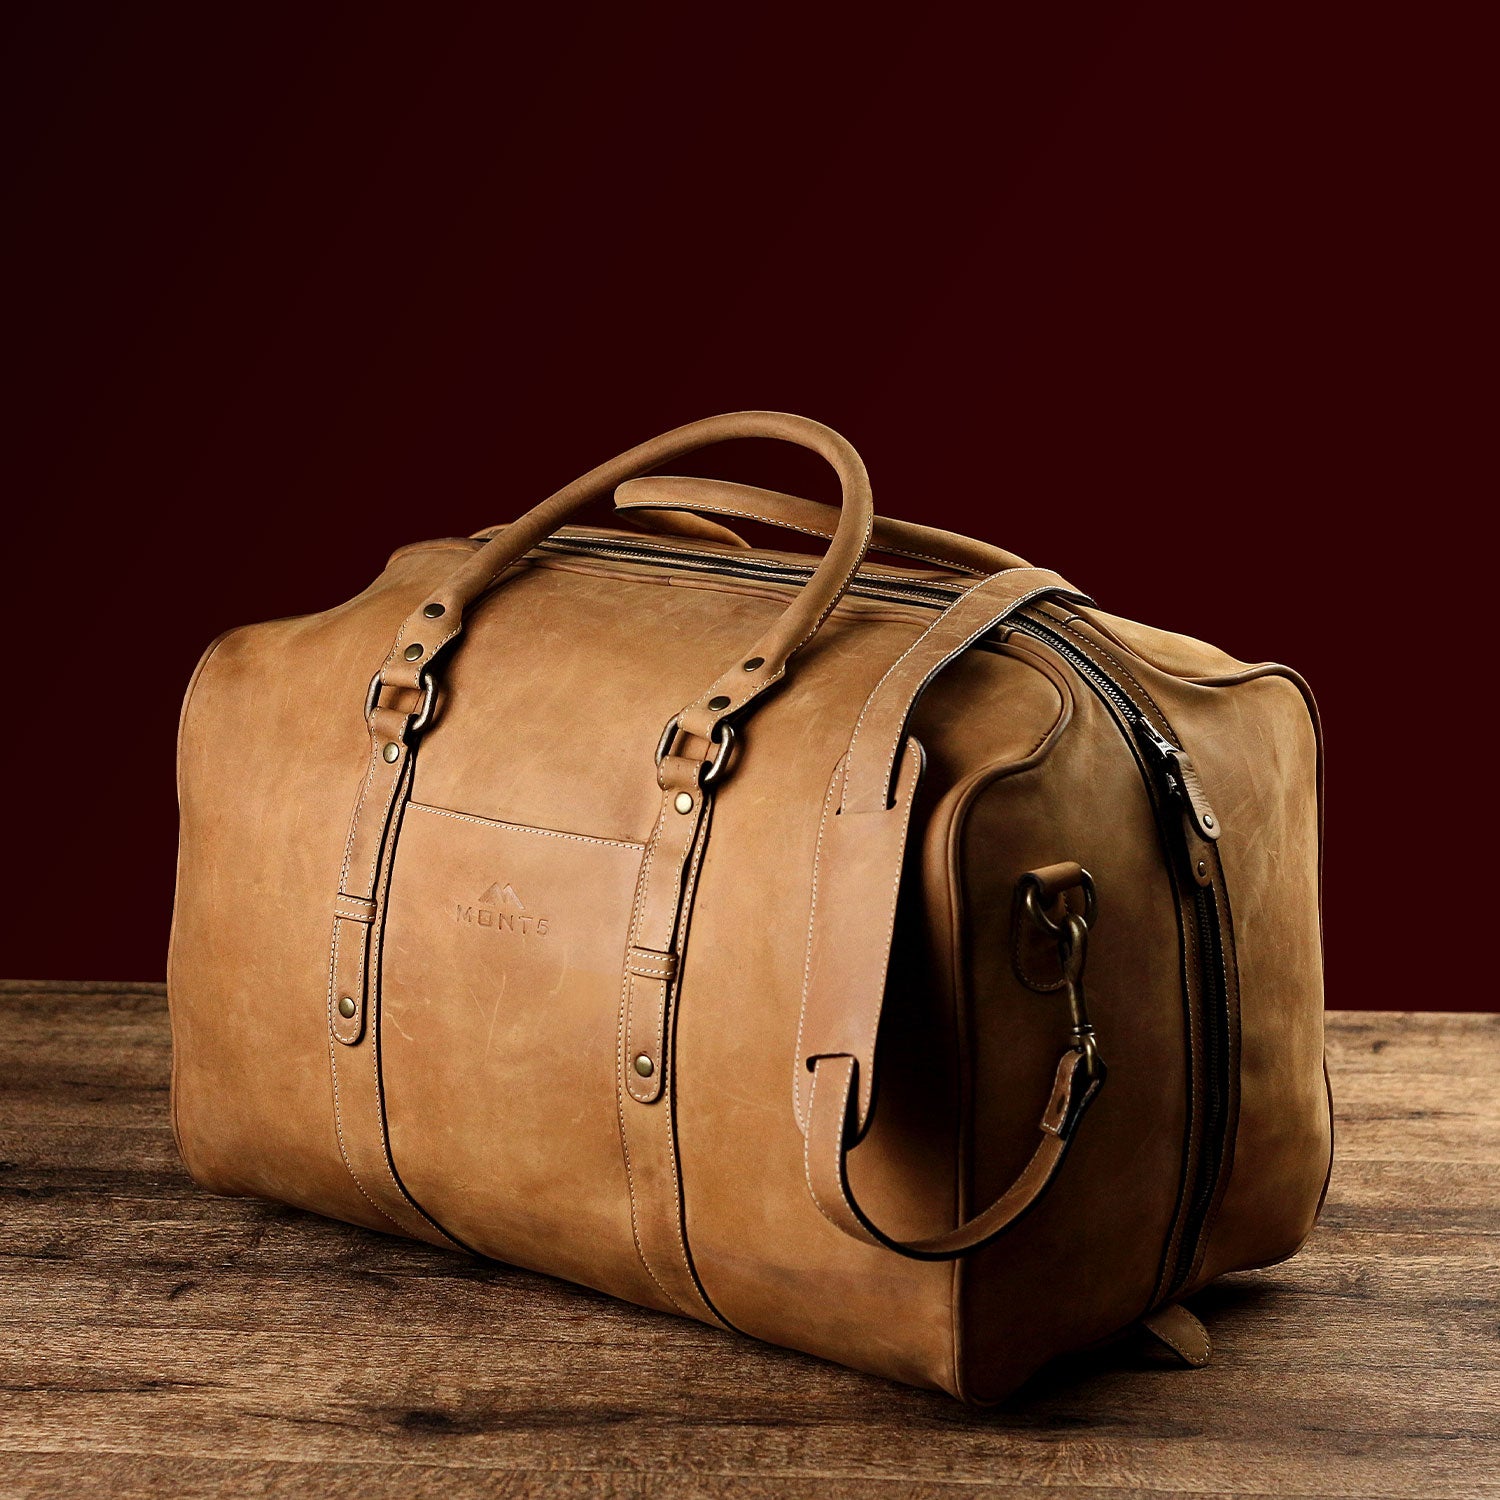 Full Grain Leather Duffle Bag | Vintage Leather Duffle Bag by Rustico